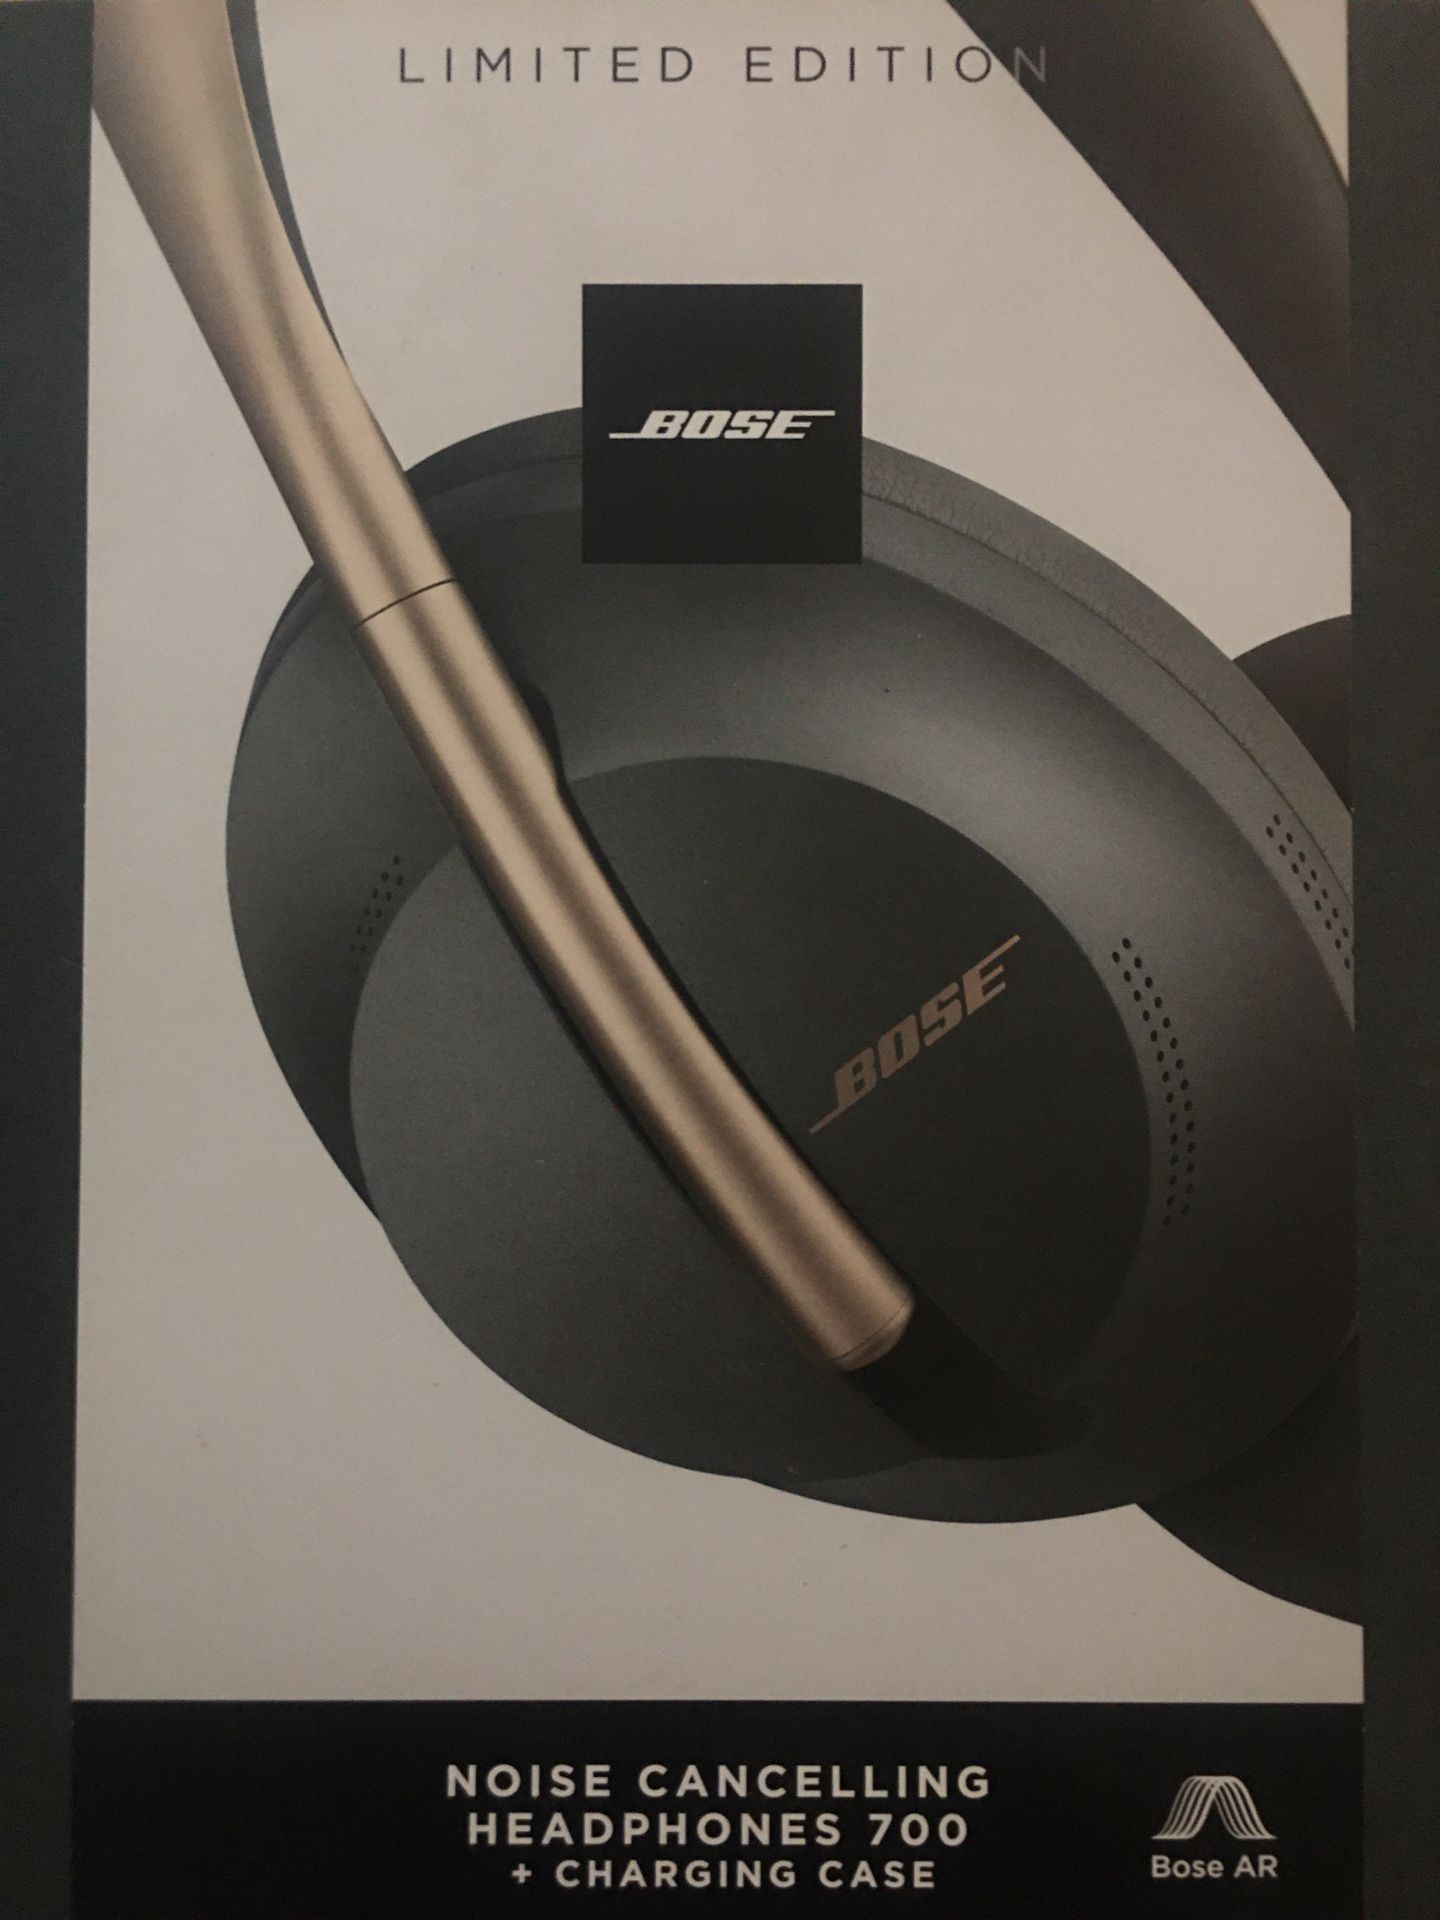 BOSE LIMITED EDITION Noise Cancelling Headphones 700 with CHARGING CASE